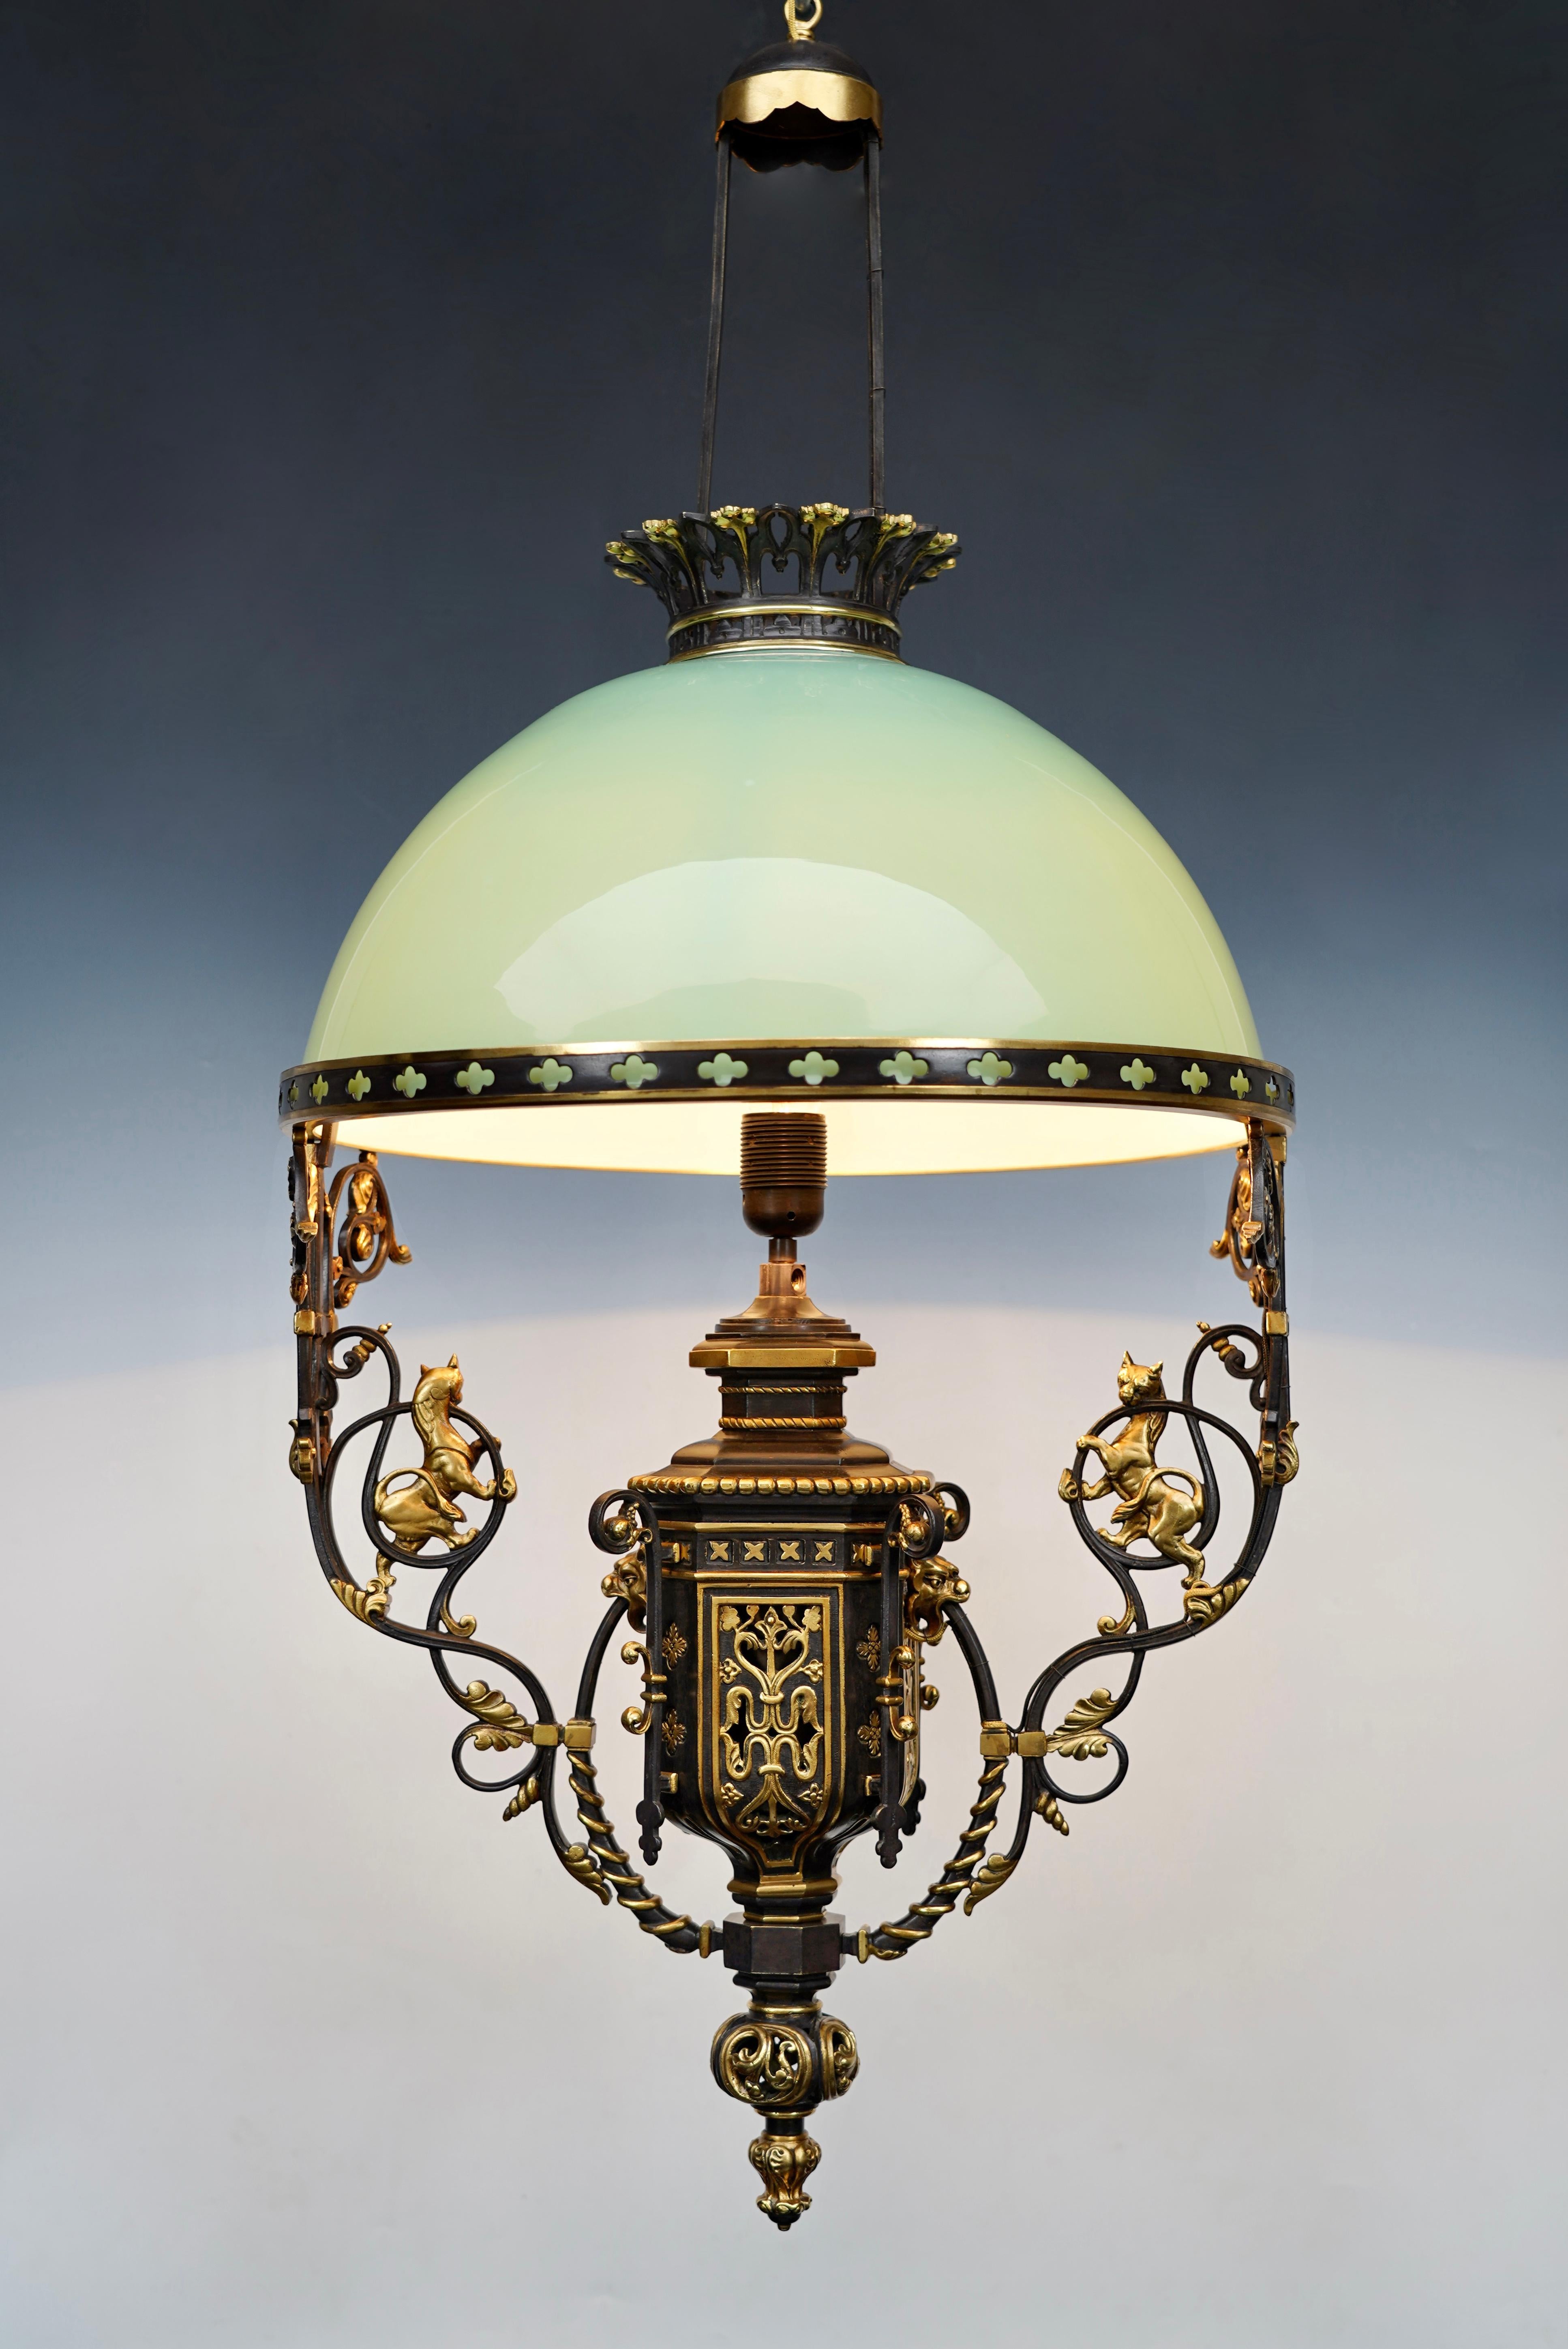 Gothic Revival Neo-Gothic Chandelier with Lions, France, circa 1860 For Sale